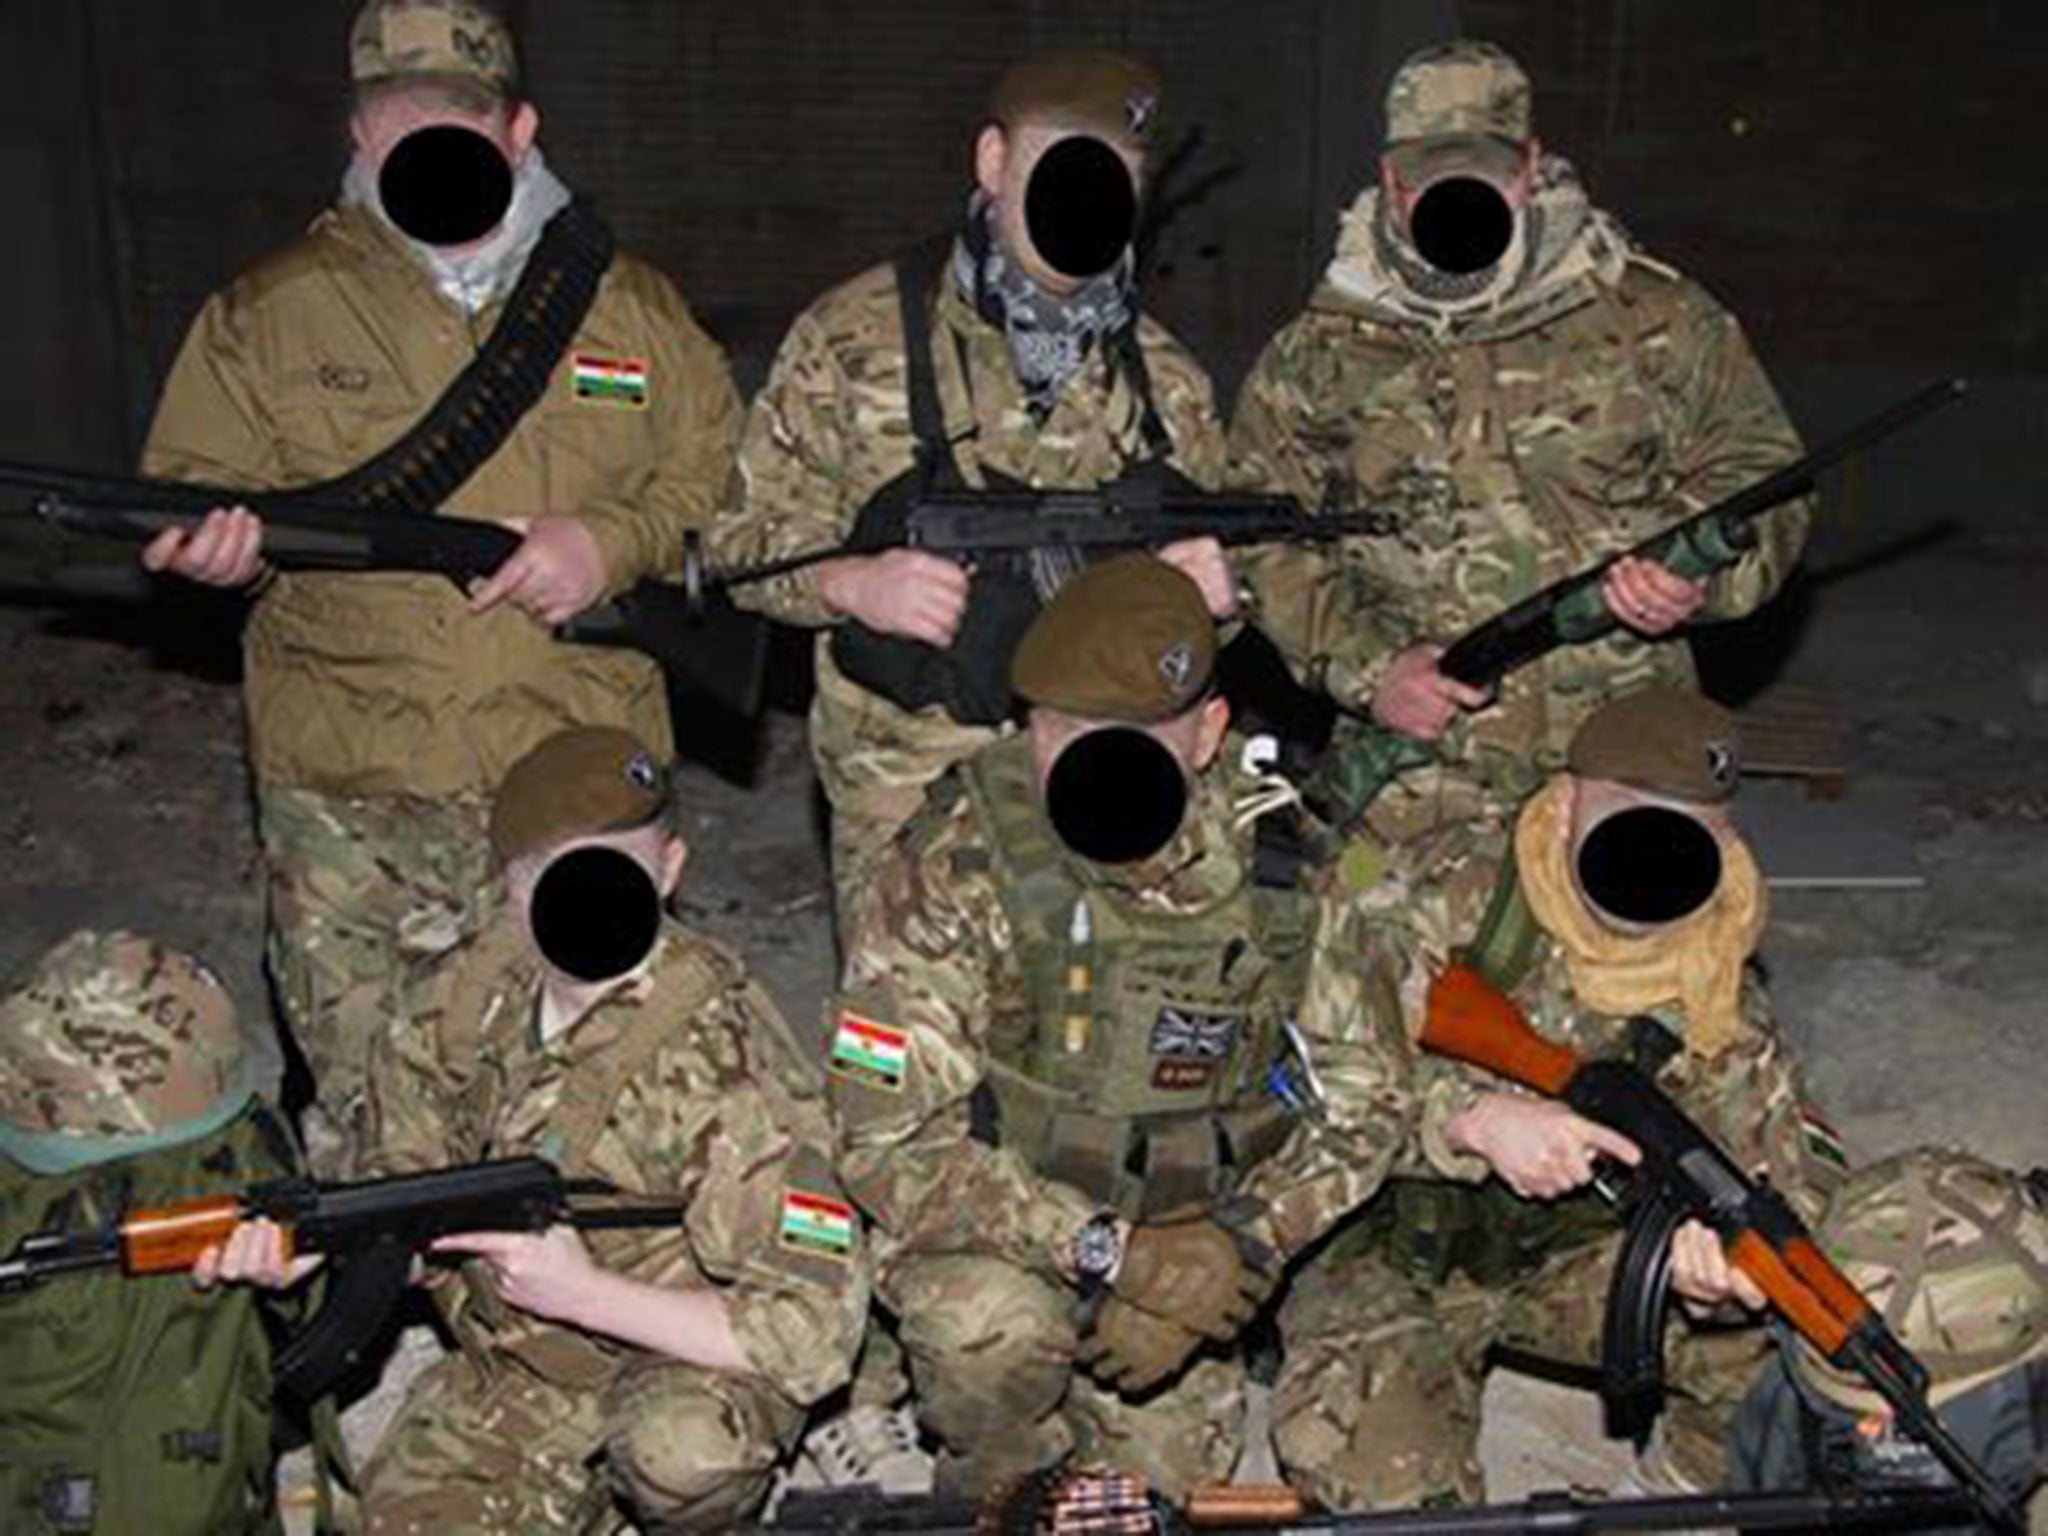 This group of former British soldiers are planning to fight alongside Kurdish militias against Isis